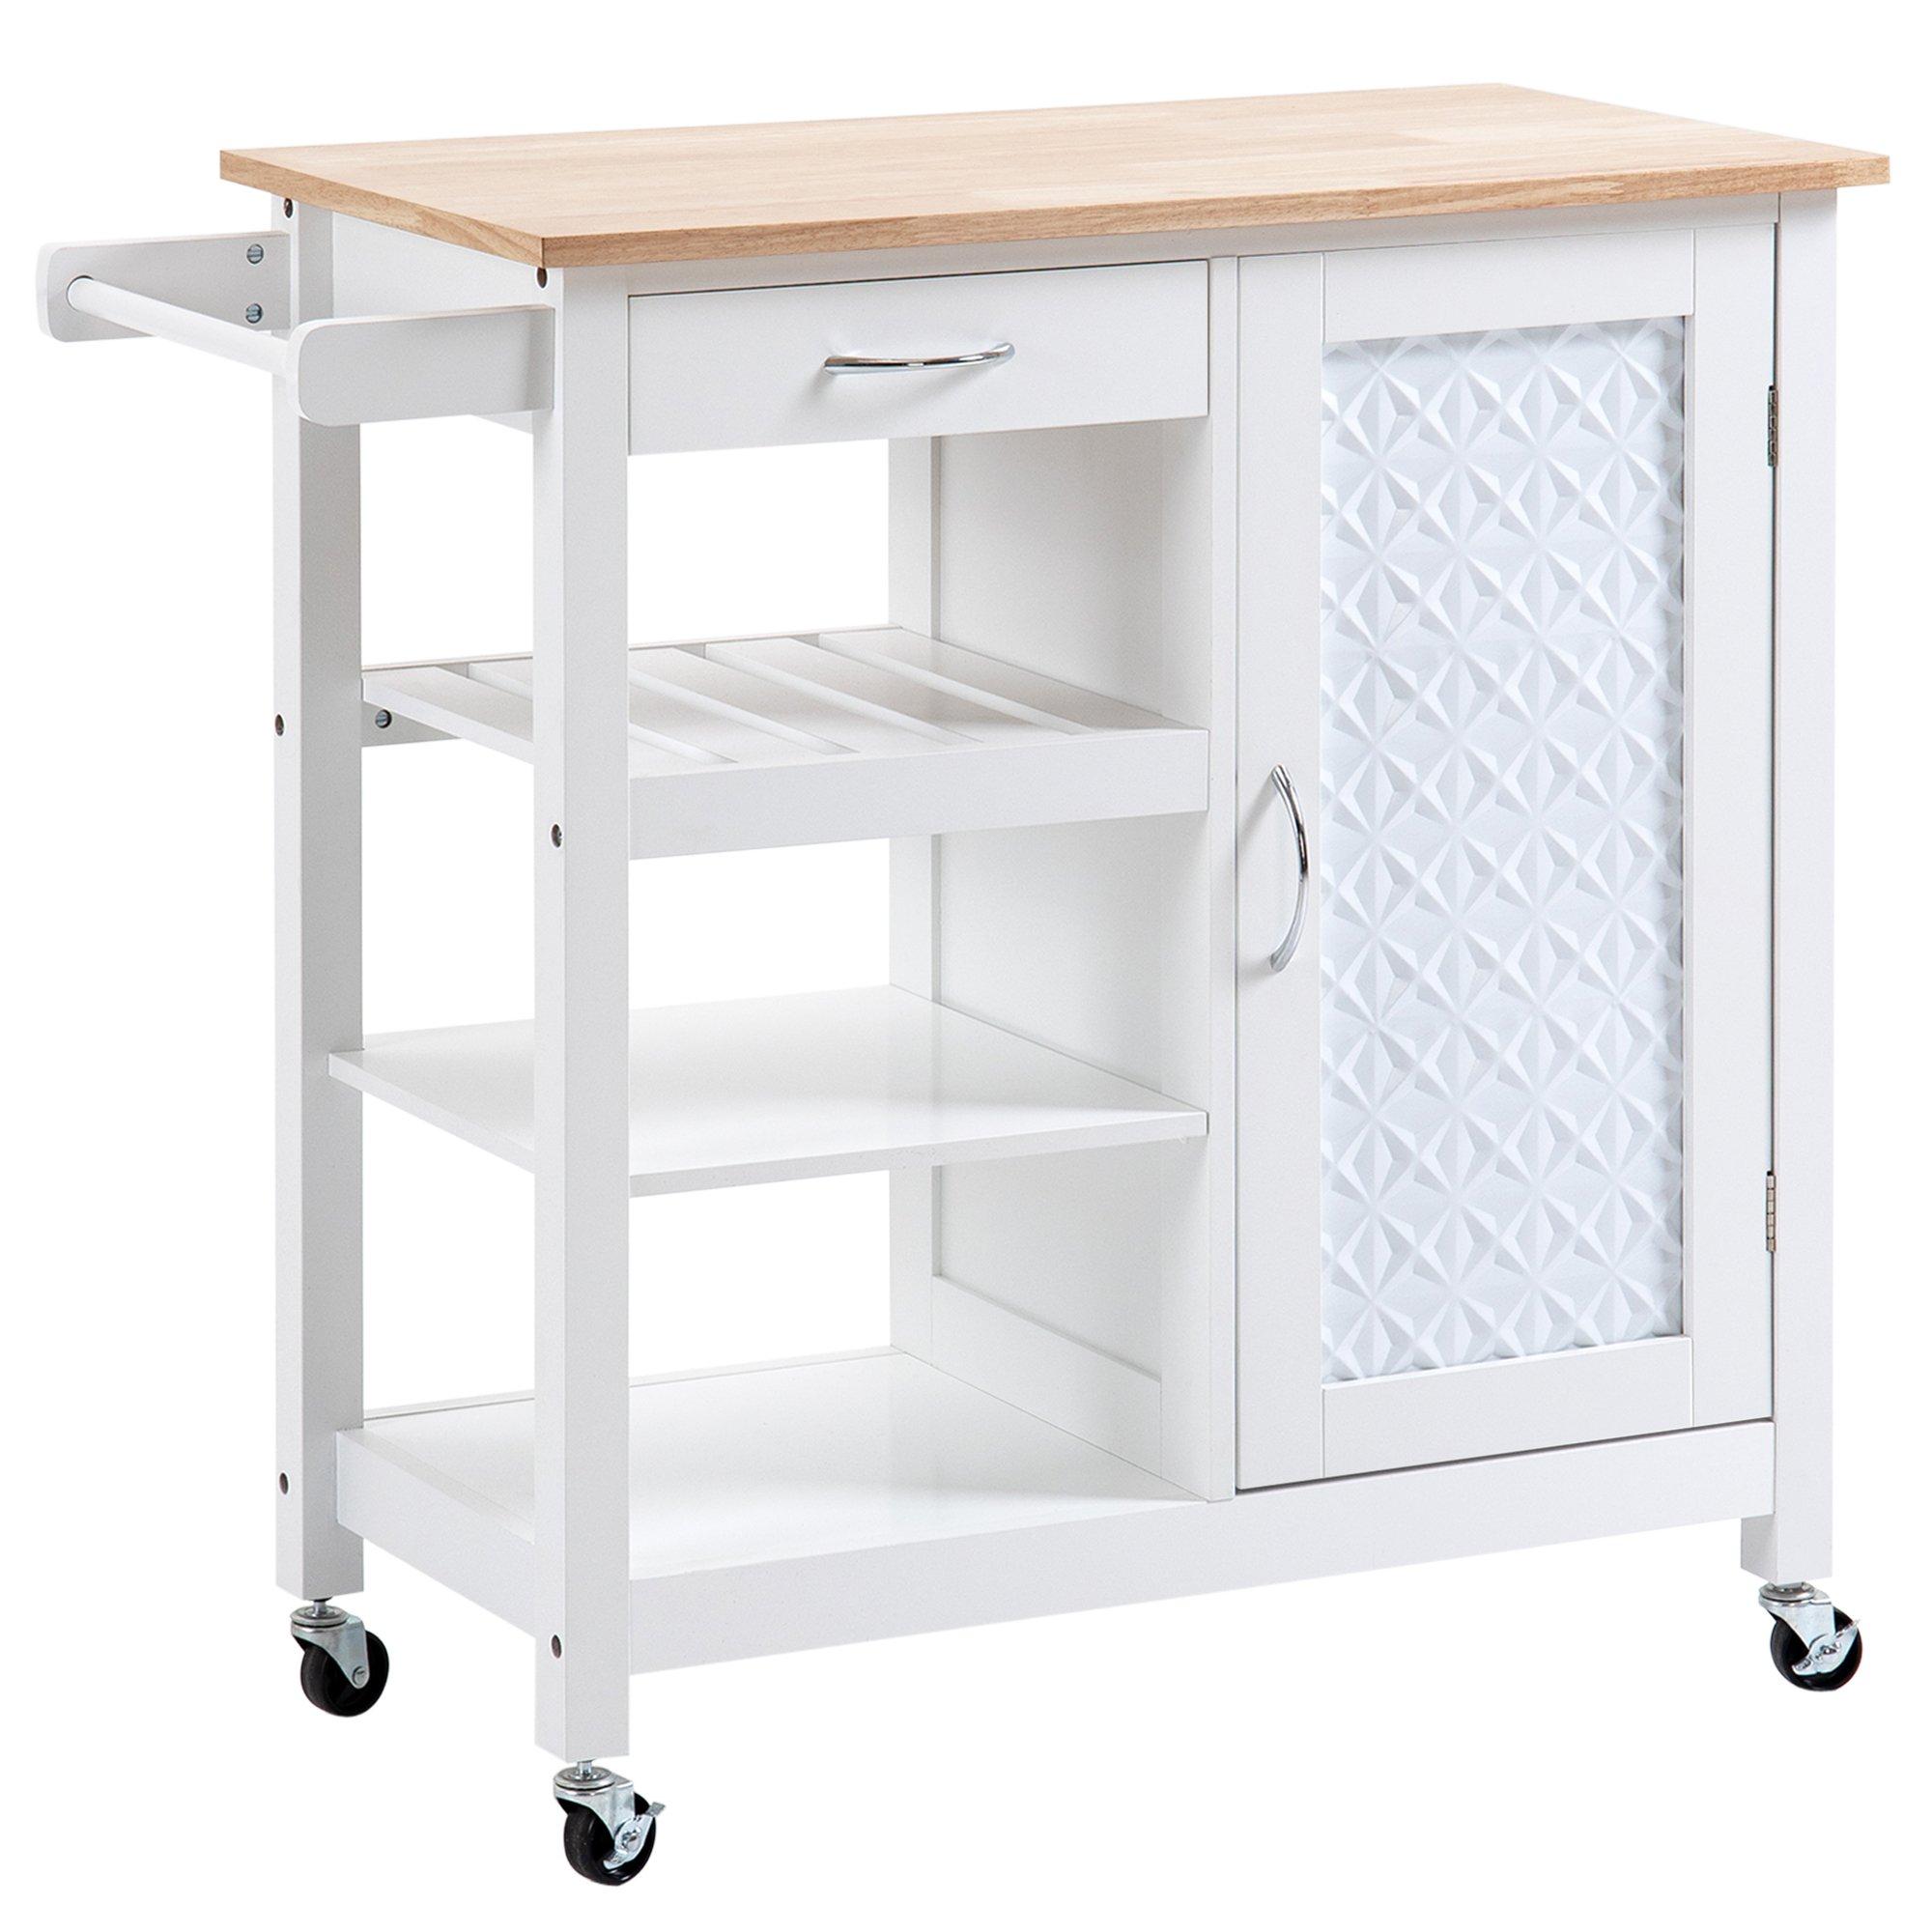 Compact Kitchen Trolley Utility Cart on Wheels with Embossed Door